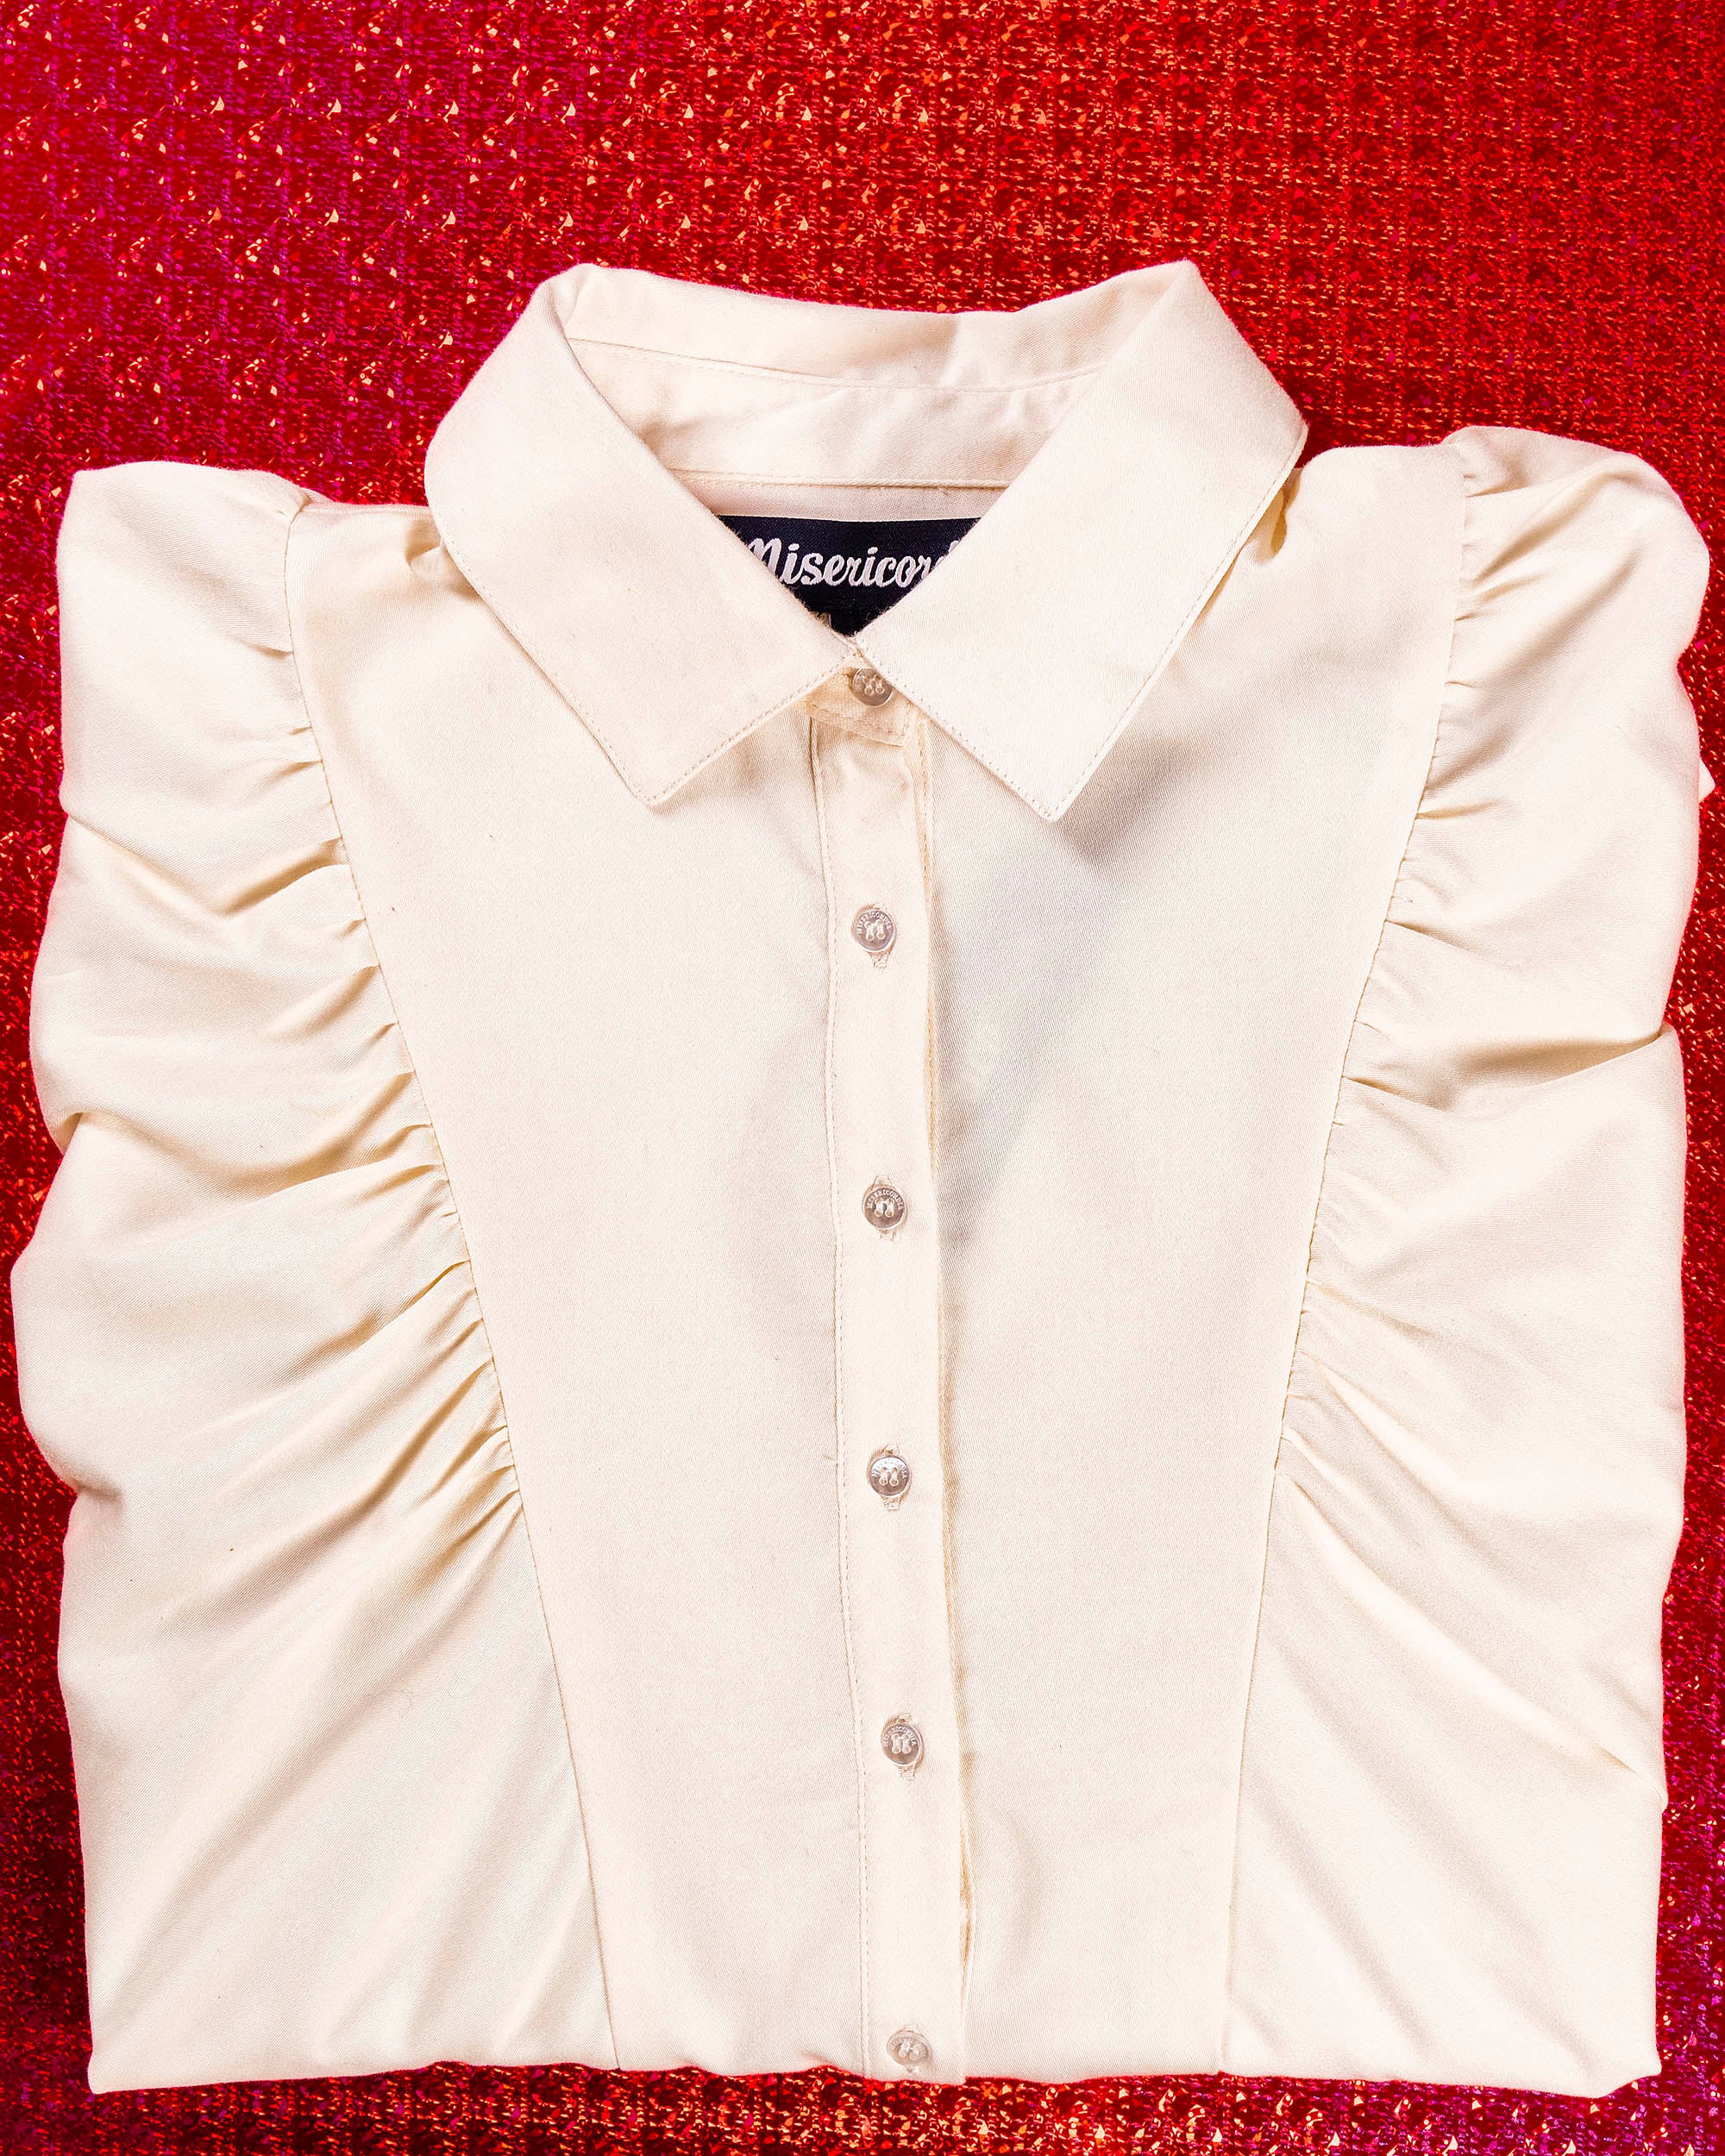 white buttoned balloon sleeve shirt folded on a red background gift idea for christmas